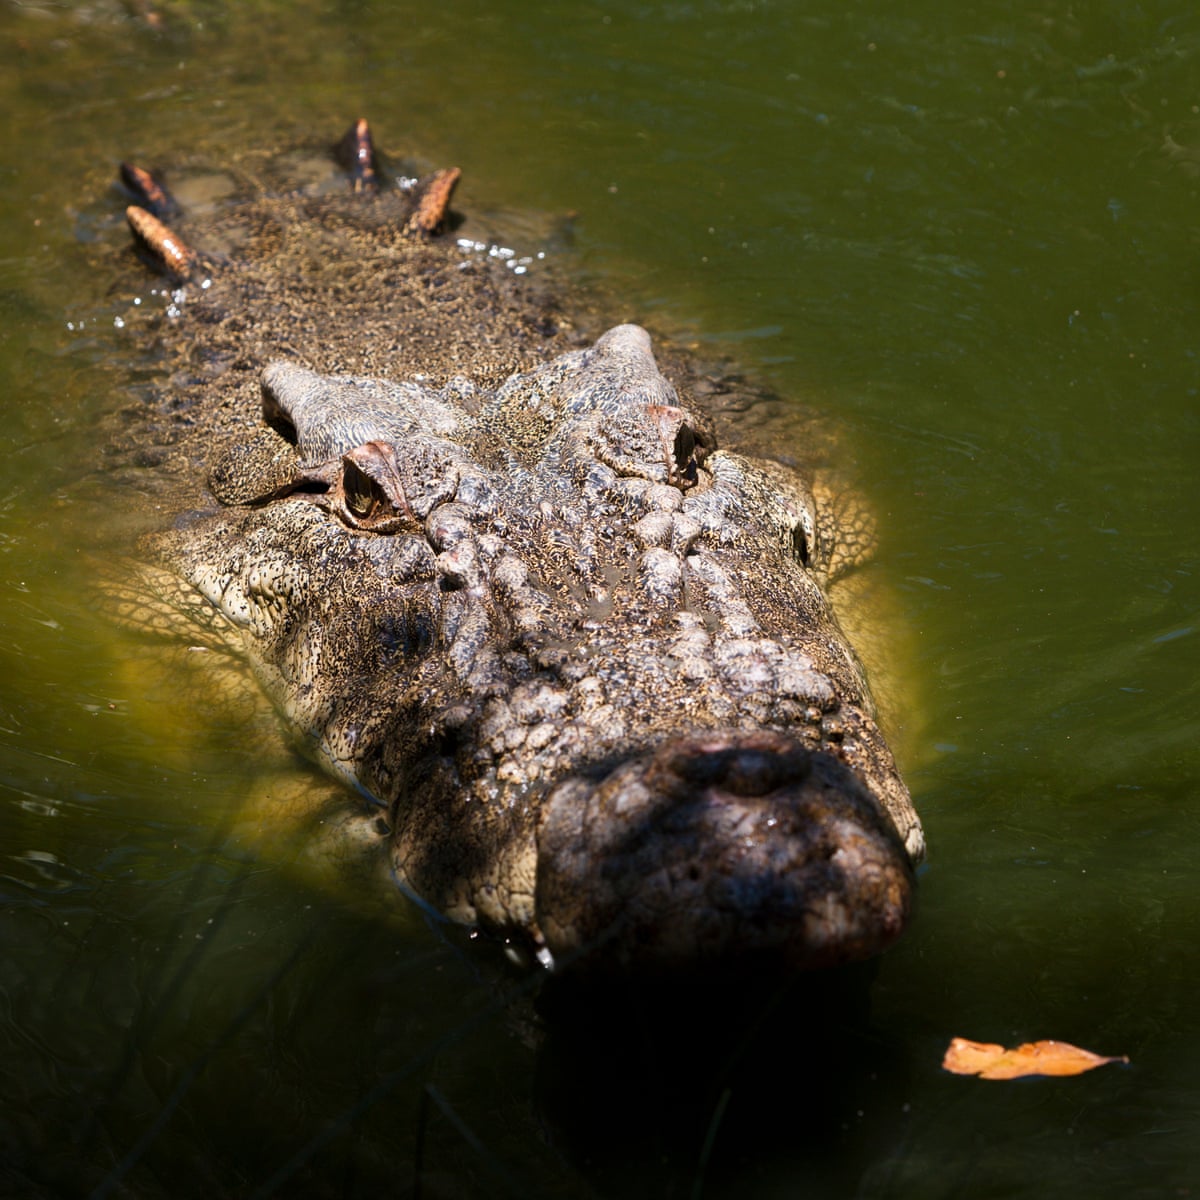 Second crocodile killed and examined for human remains after man went missing in | Queensland | The Guardian